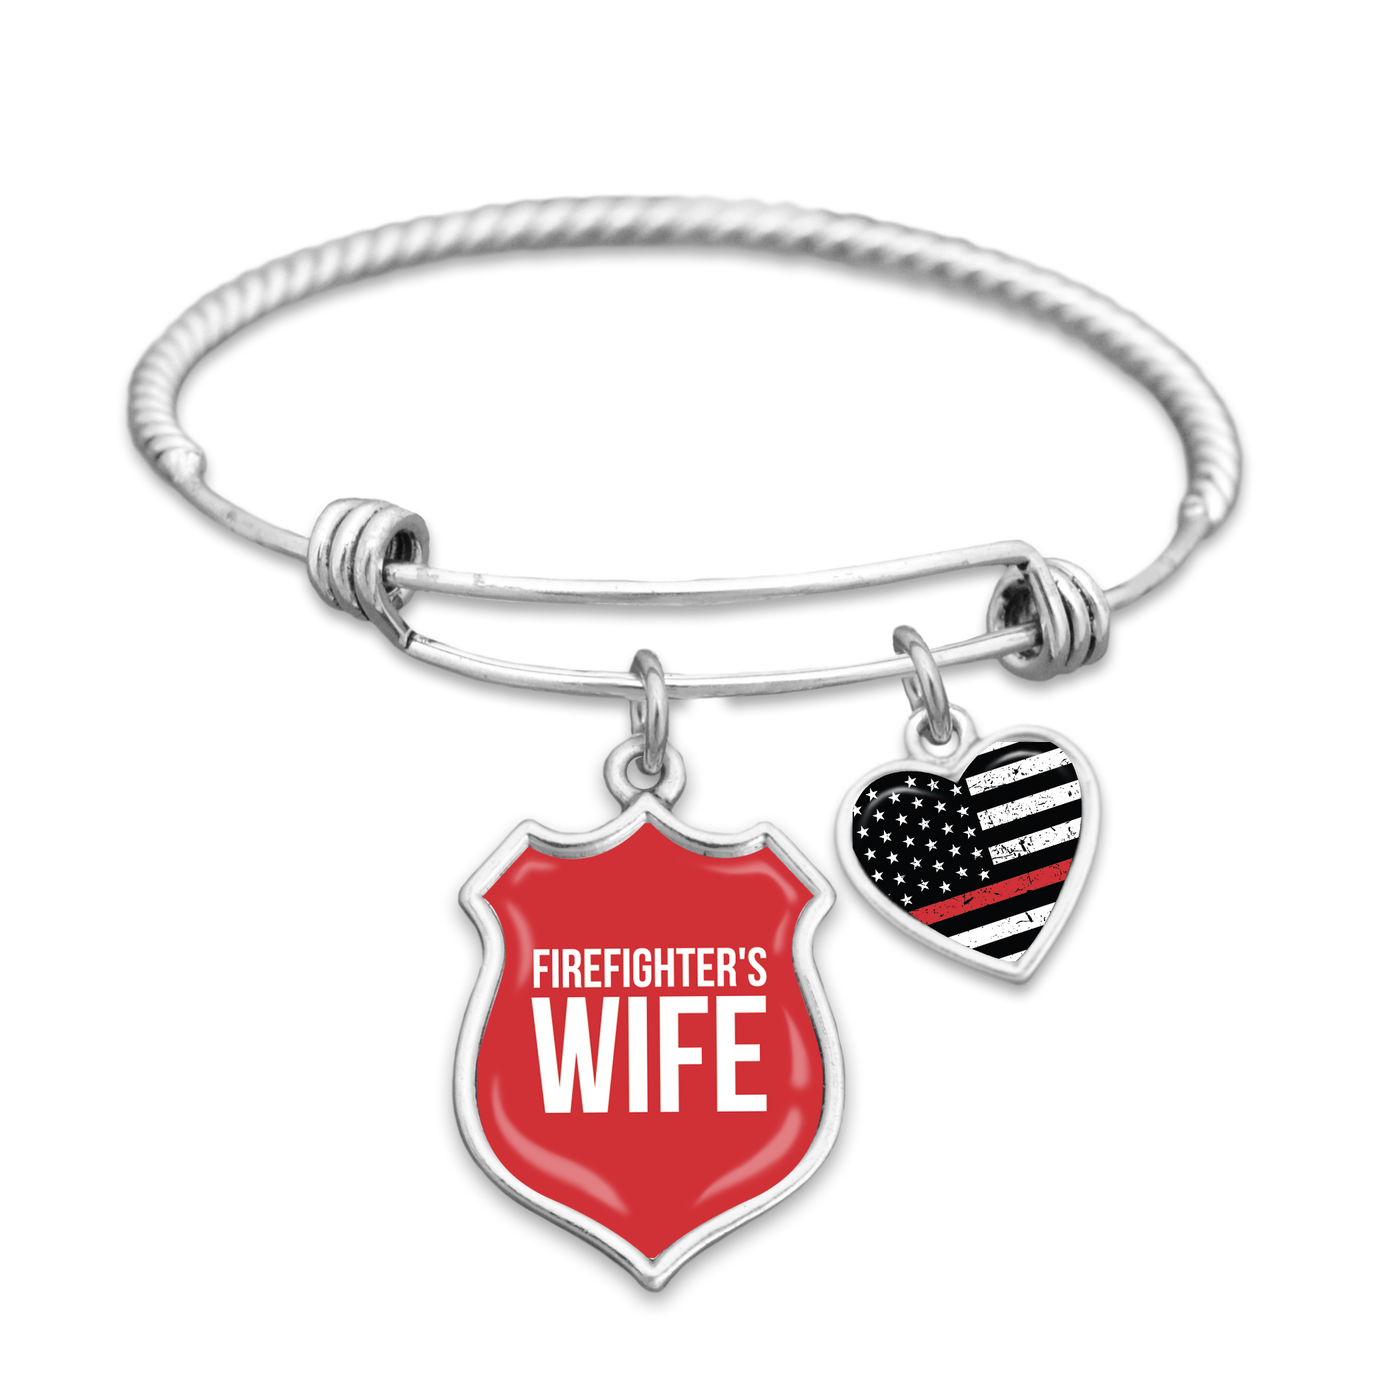 Firefighter's Wife Thin Red Line Charm Bracelet